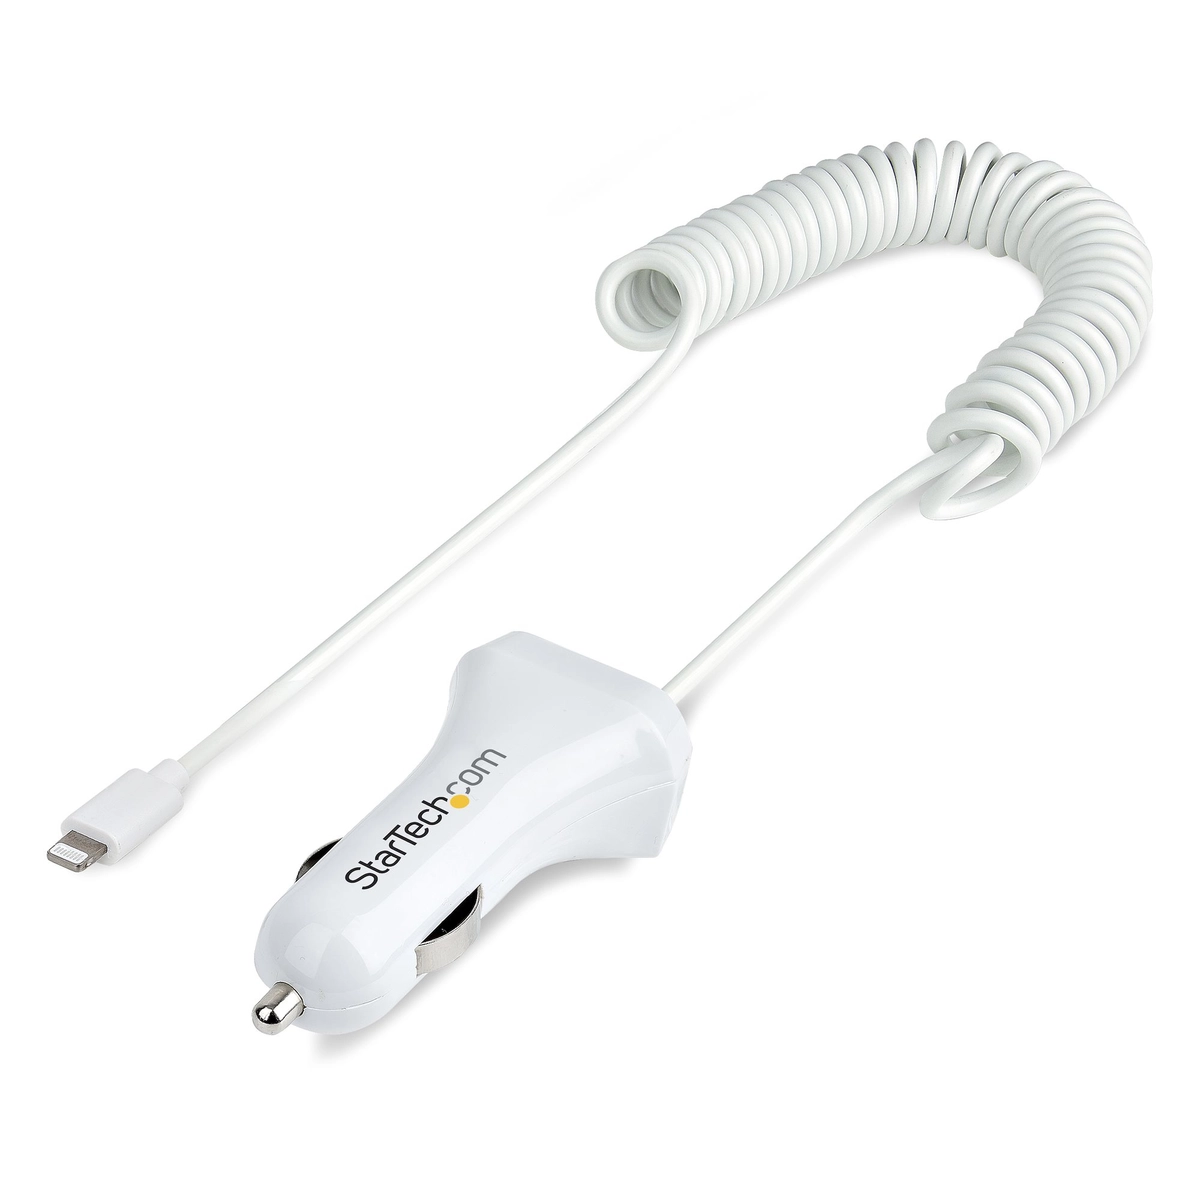 Lightning Car Charger w/ Cable 2 Ports